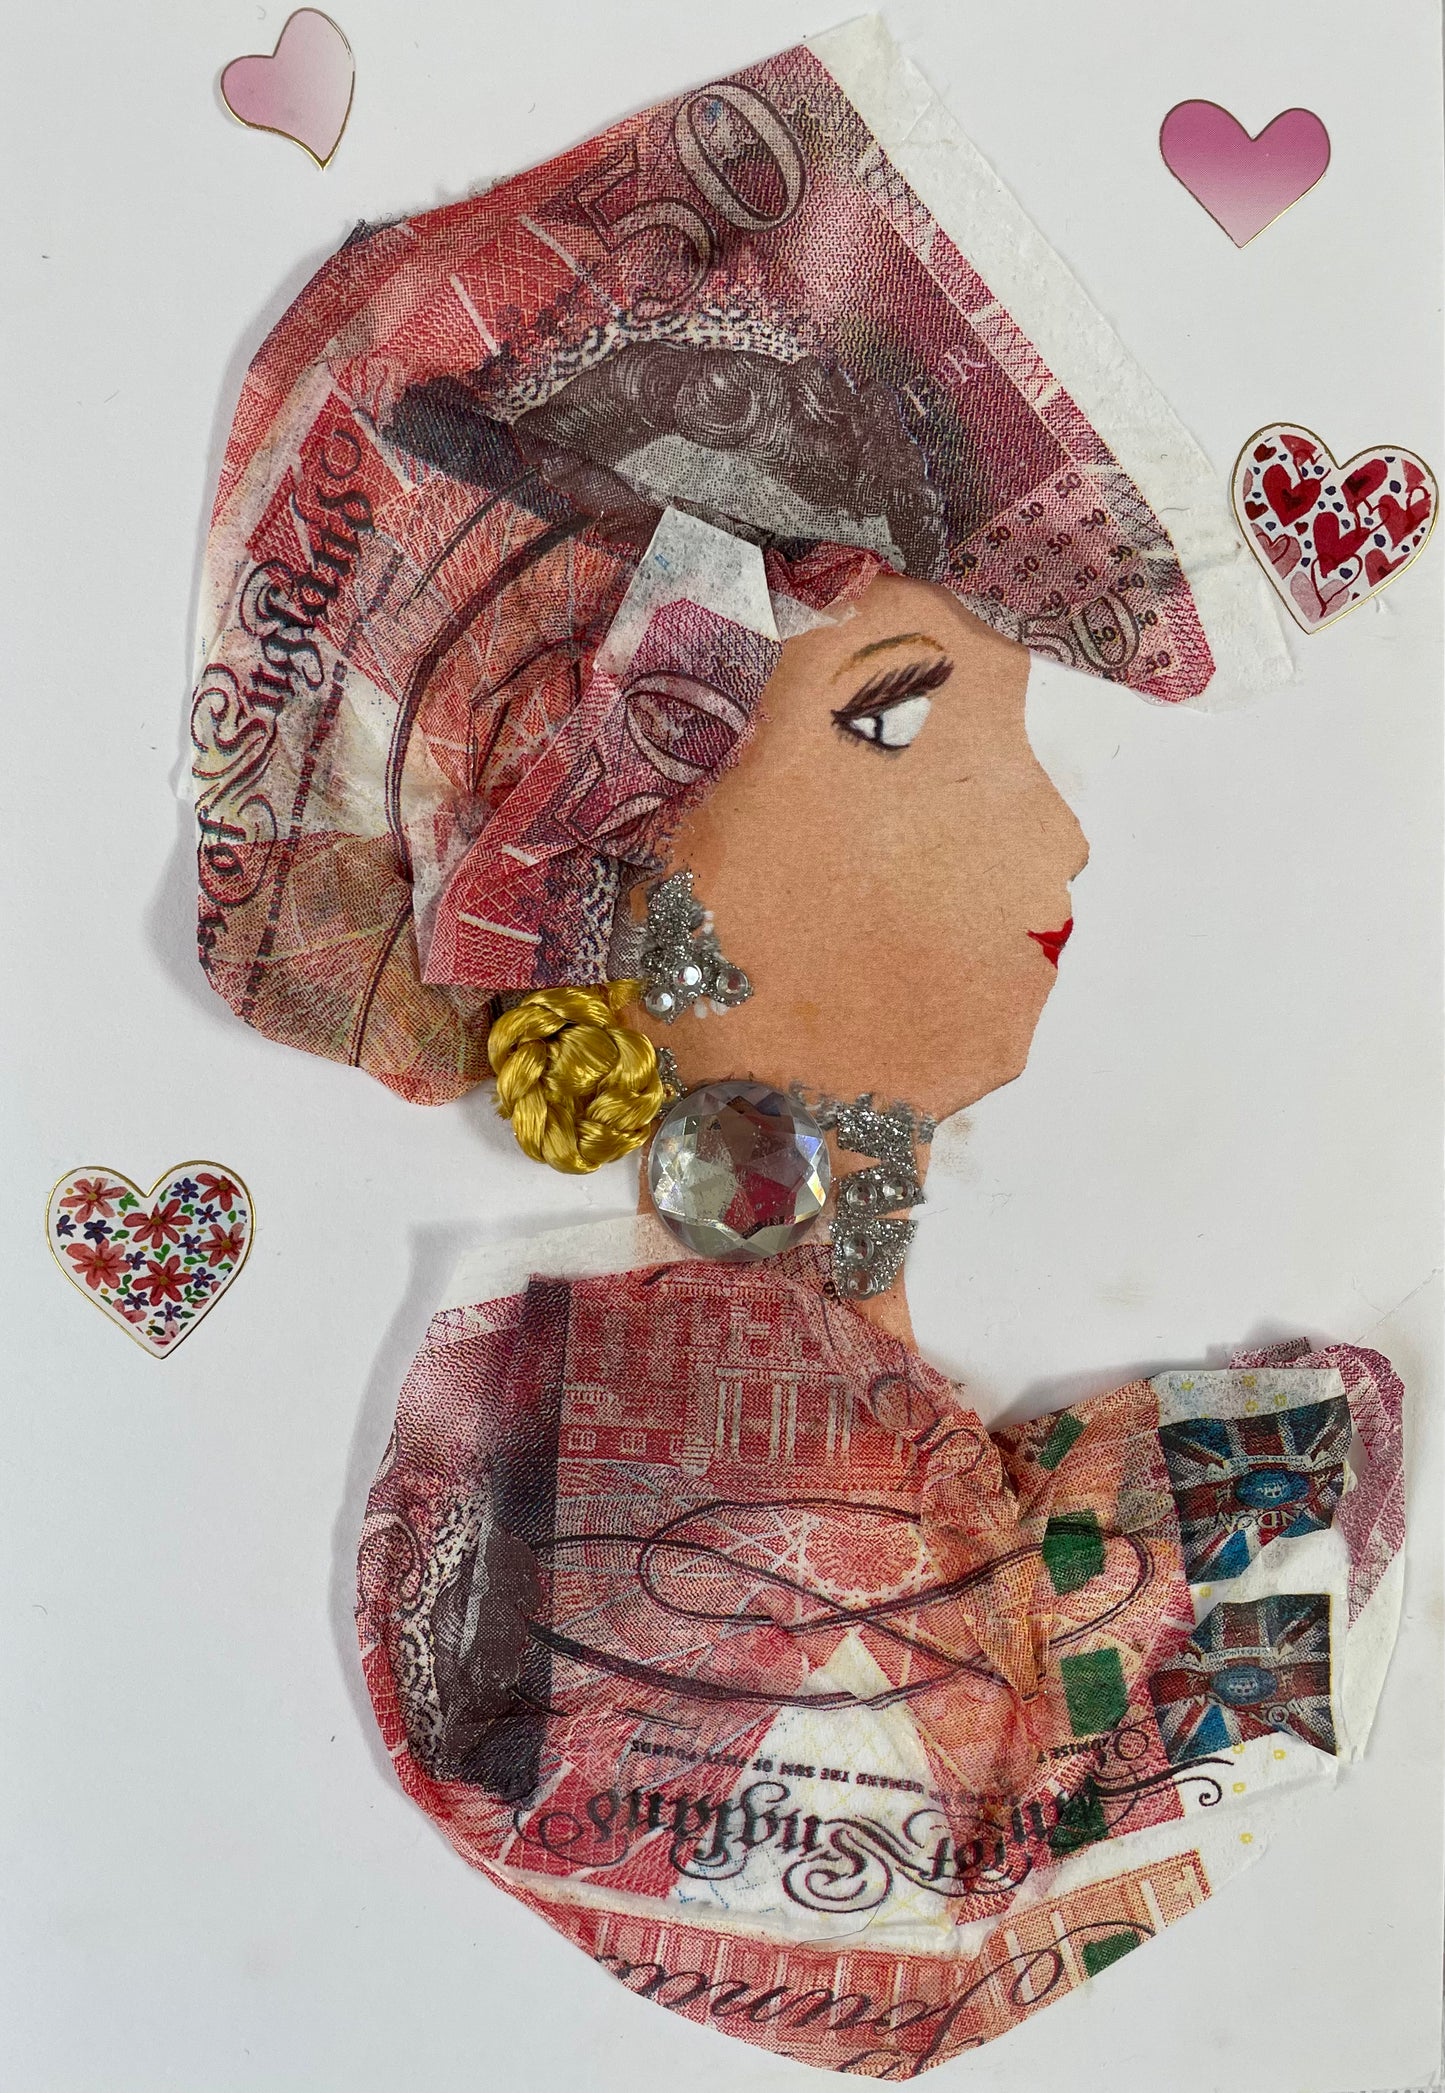 I designed this card of a woman named Mish Marble. She has a white skin tone and wears a money print hat. She wears a matching money print blouse. She wears silver jewellery. In the background there are four pink and heart hearts. 